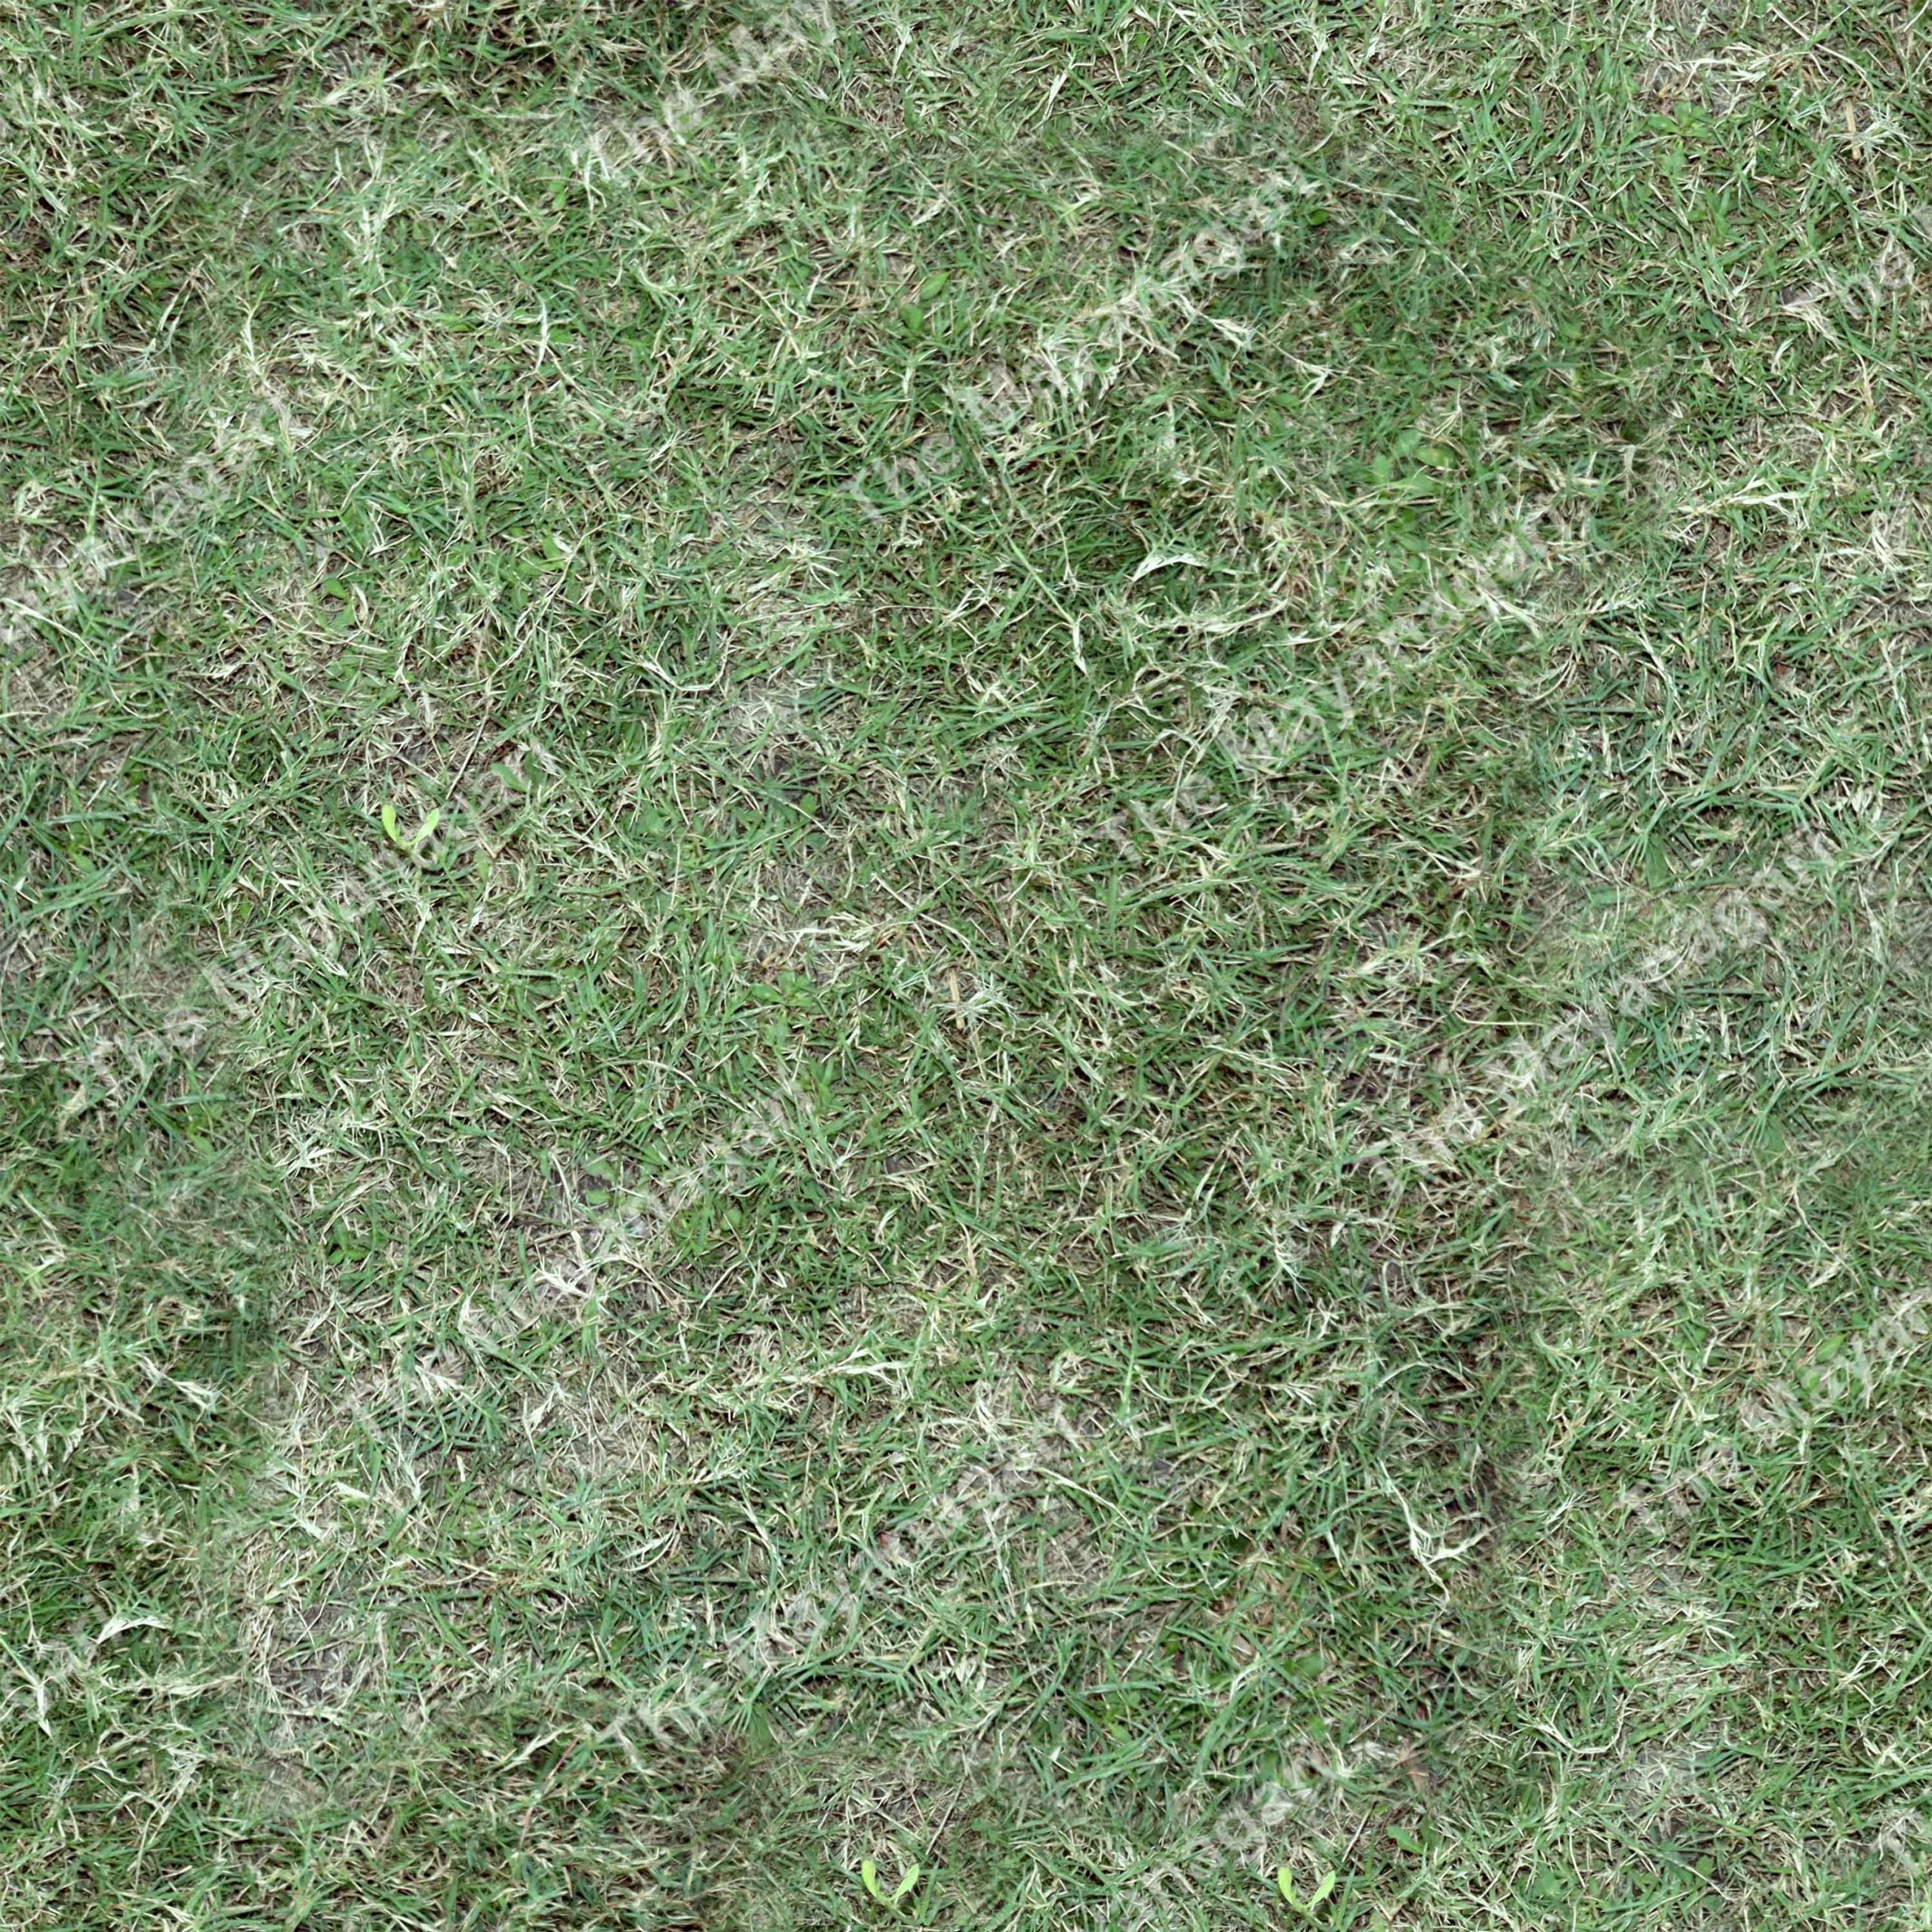 4K Grass Seamless Texture Download Photo Free Download